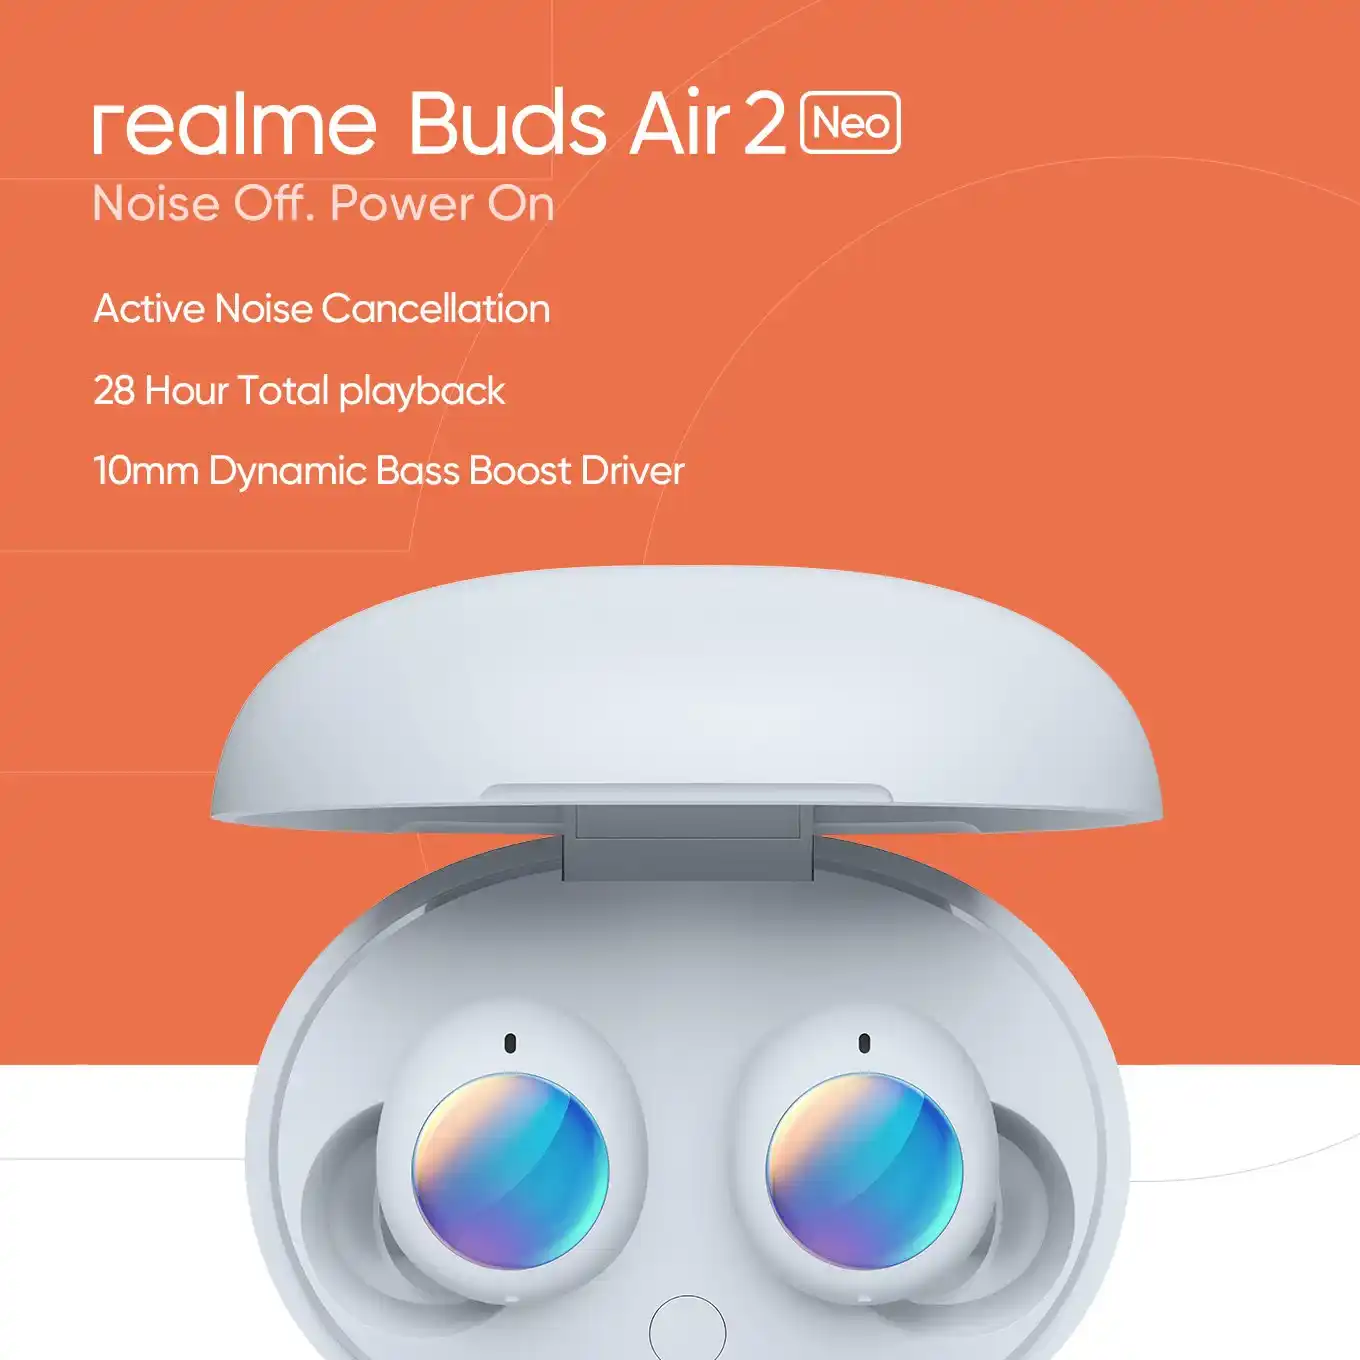 Realme Buds Air 2 Neo launching on April 7 in Pakistan